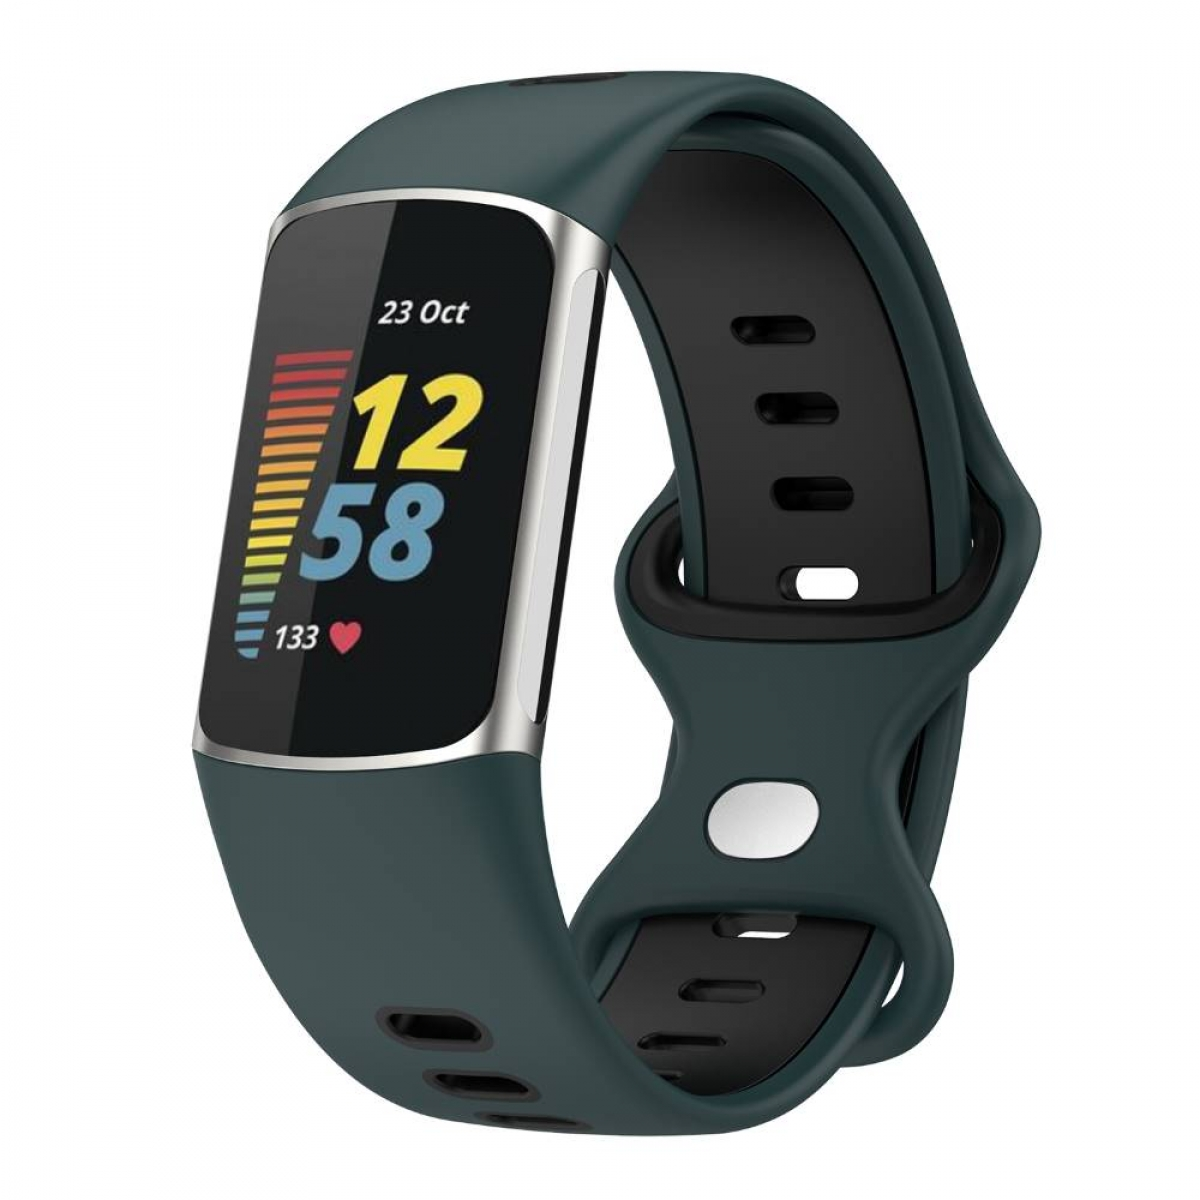 CASEONLINE Fitbit, Multicolor 5, Charge Twin, Fitbit Smartband,